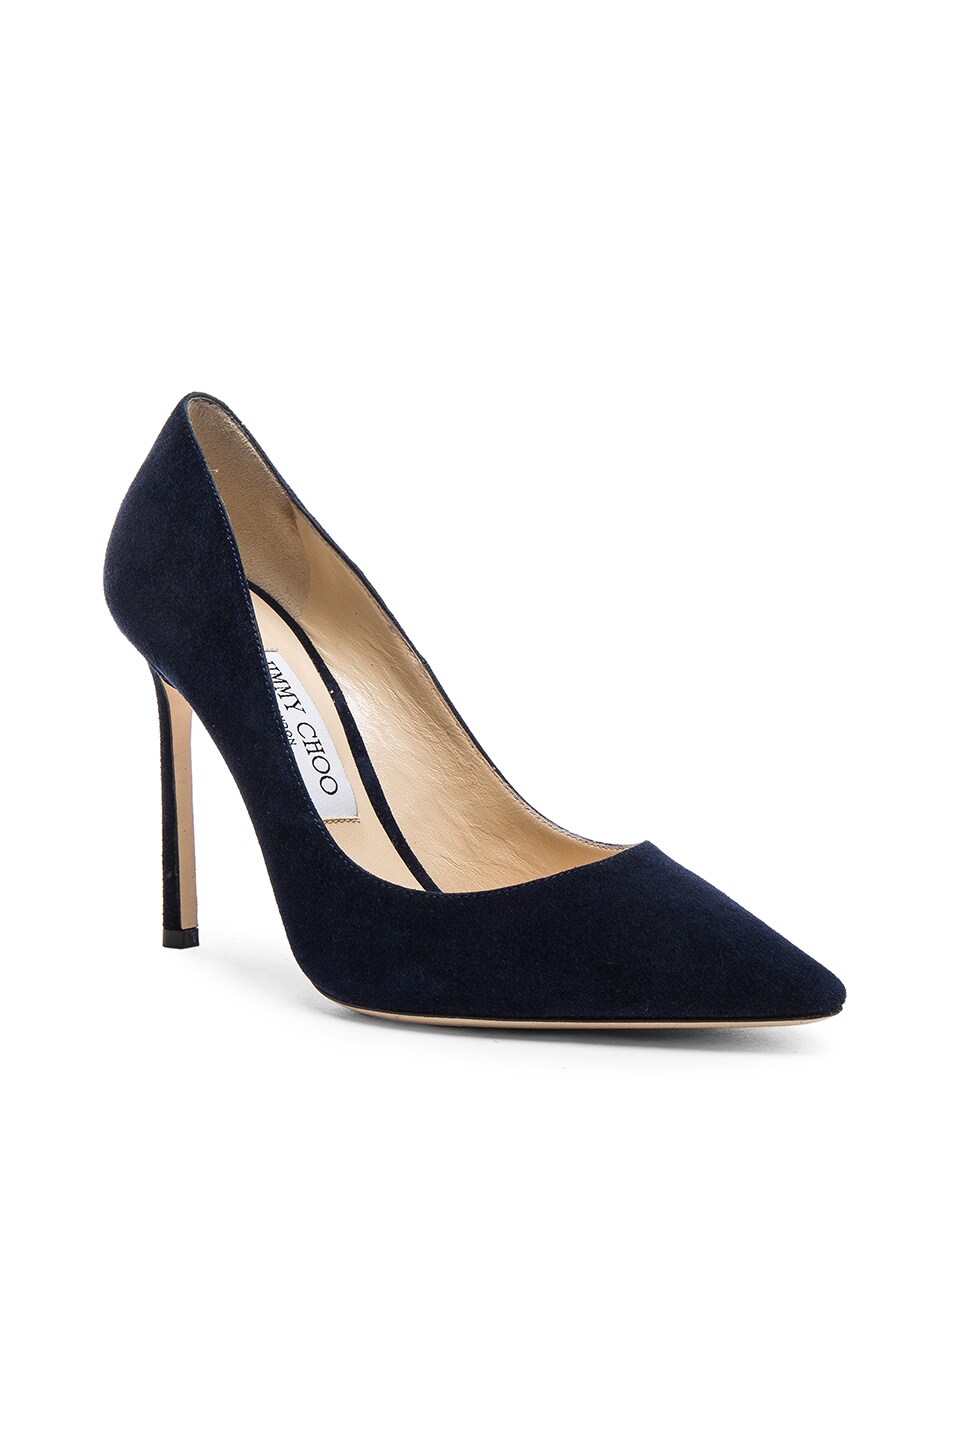 JIMMY CHOO Romy 85 Navy Suede Pointy Toe Pumps | ModeSens